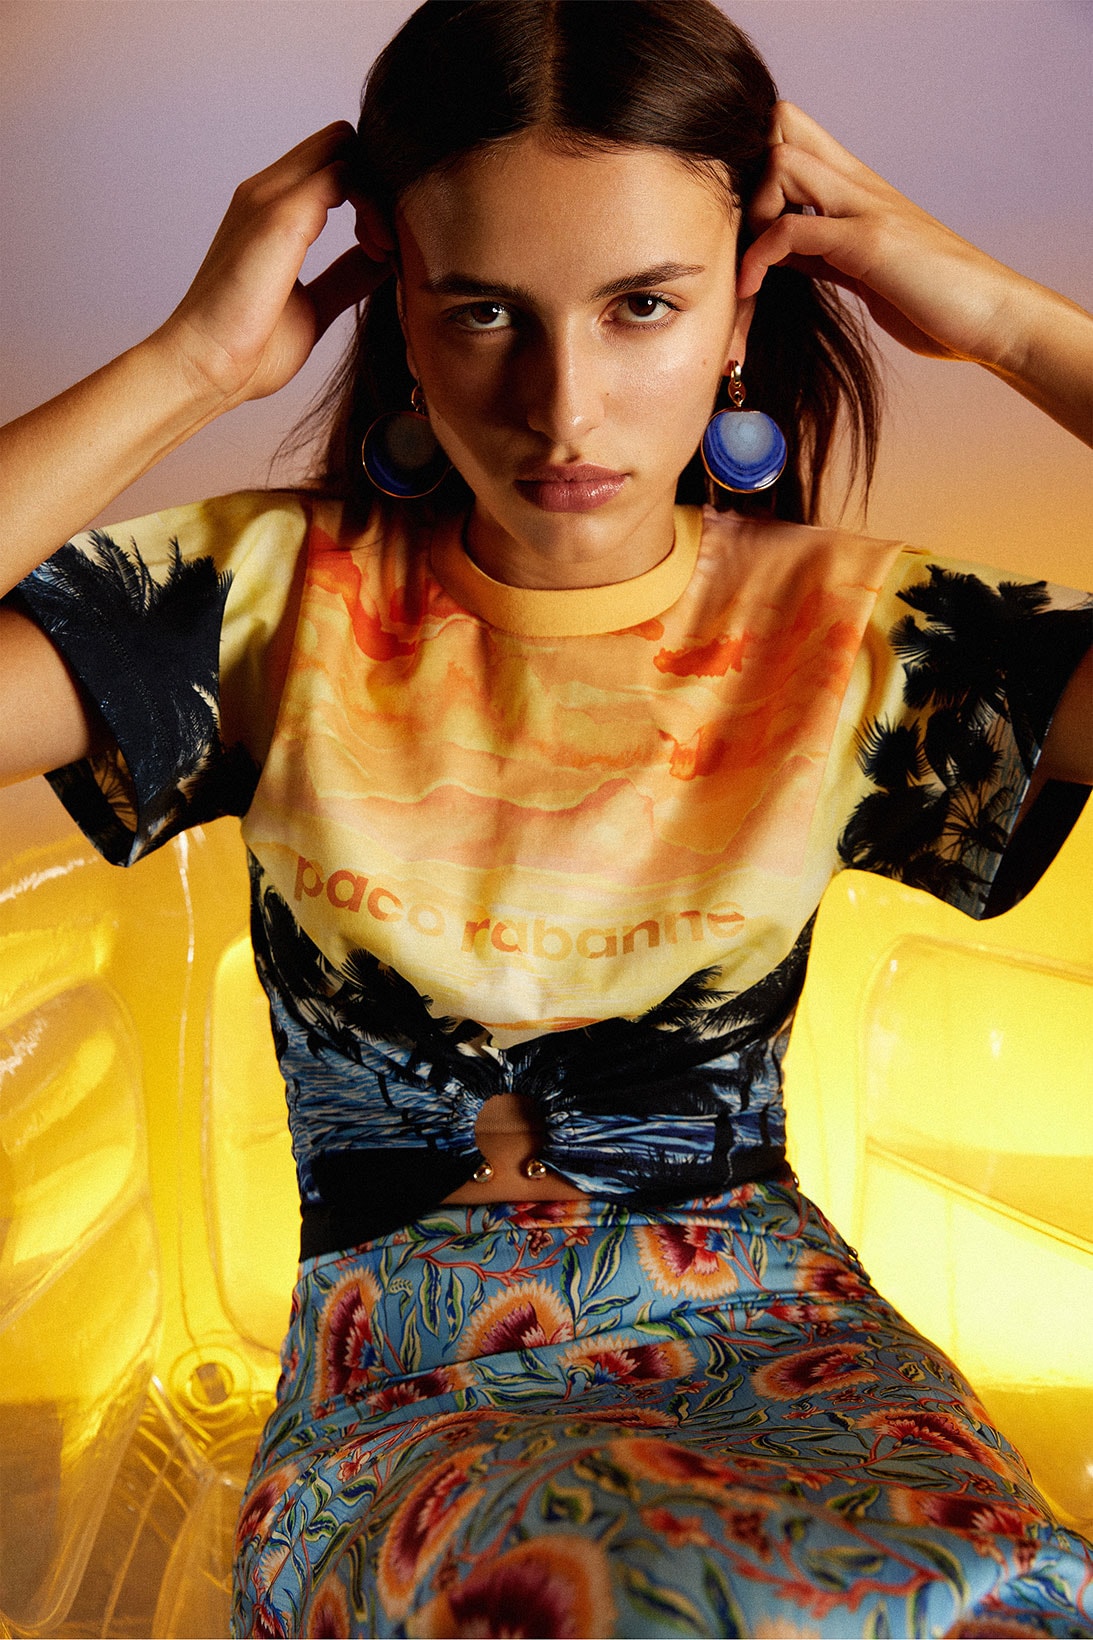 Paco Rabanne "Endless Sunset" Summer Capsule Collection Dresses Logo T-Shirts Release